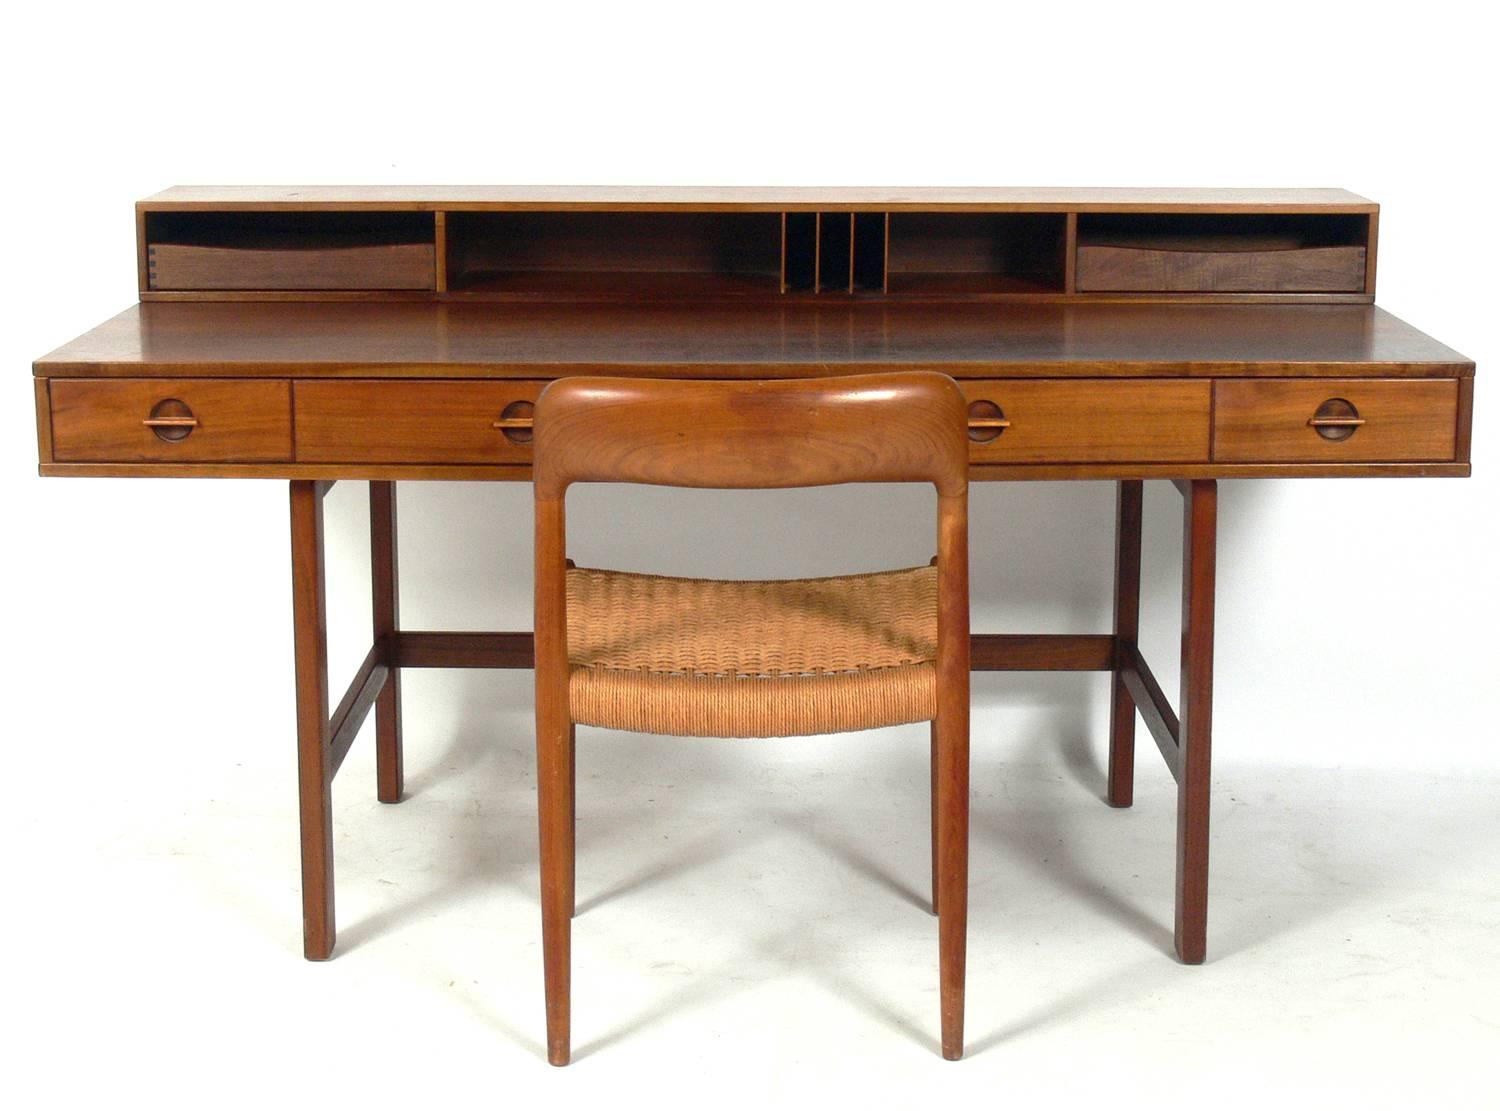 Clean Lined Architectural Danish Modern Desk and Chair, Danish, circa 1960s. The flip top partner’s desk was designed by Jens Quistgaard for Peter Løvig Nielsen and the chair was designed by Niels Moller. The desk and chair have lived their entire